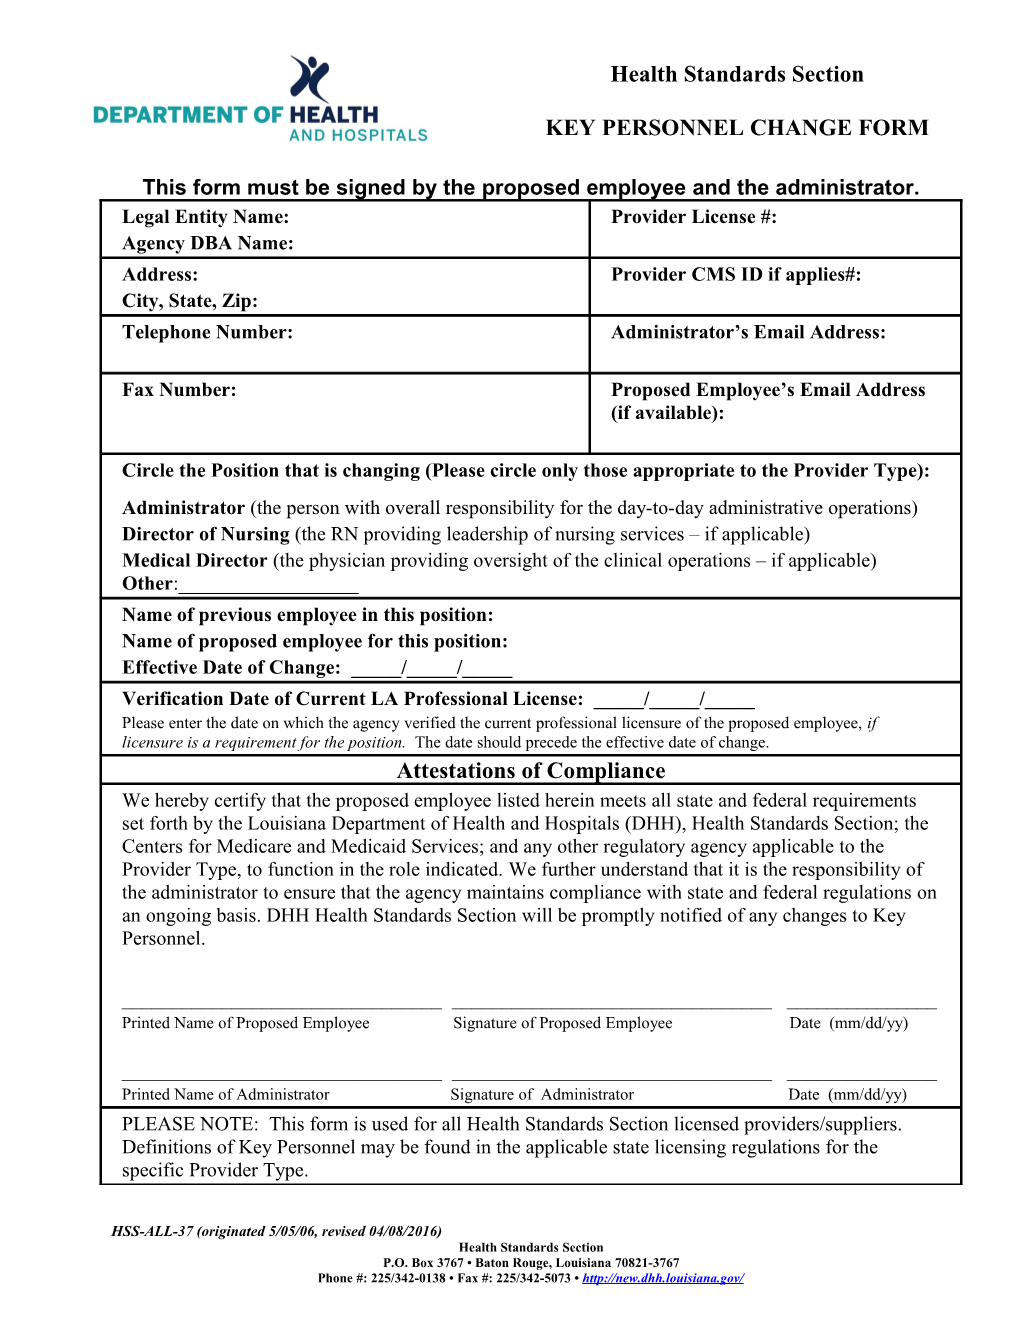 This Form Must Be Signed by the Proposed Employee and the Administrator